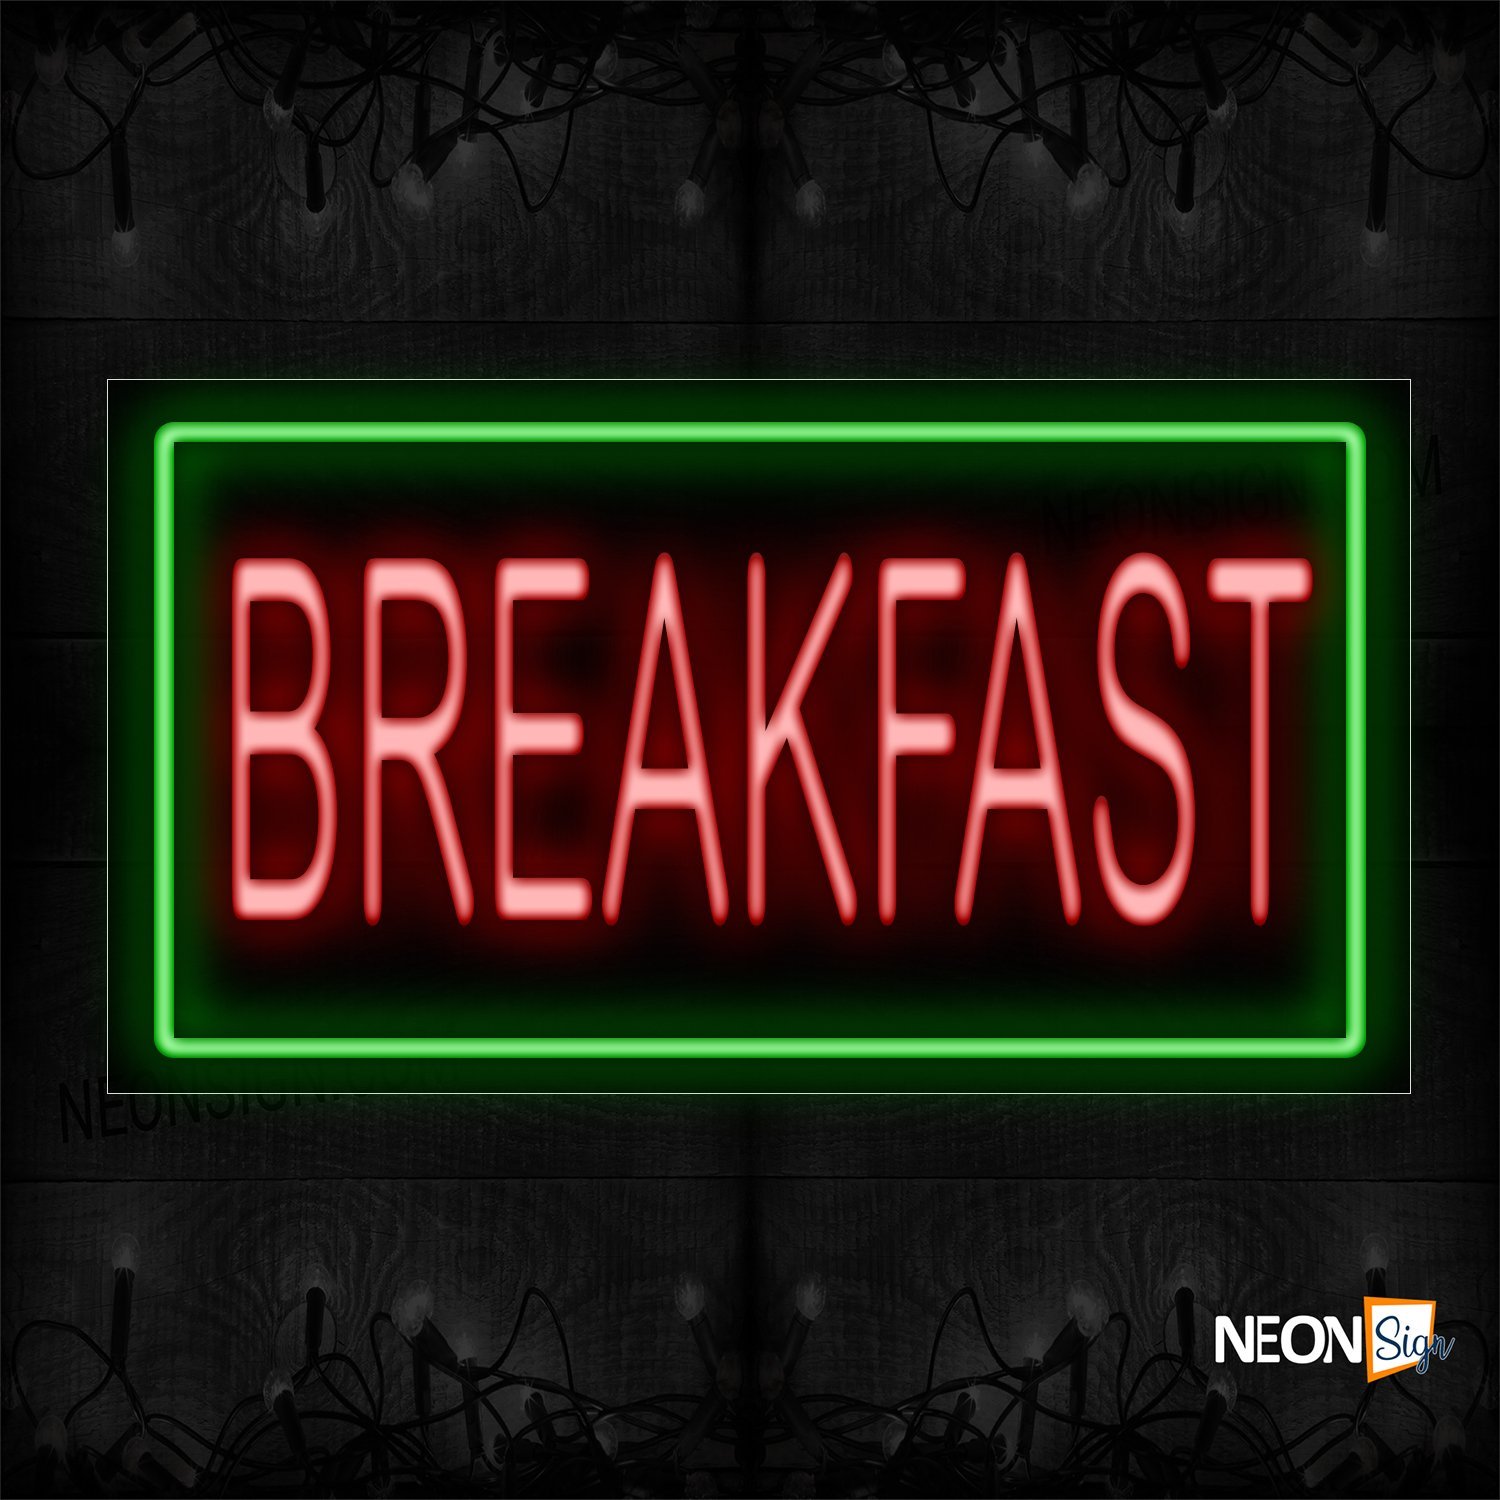 Image of 11054 Breakfast In Red With Green Border Neon Sign_20x37 Black Backing